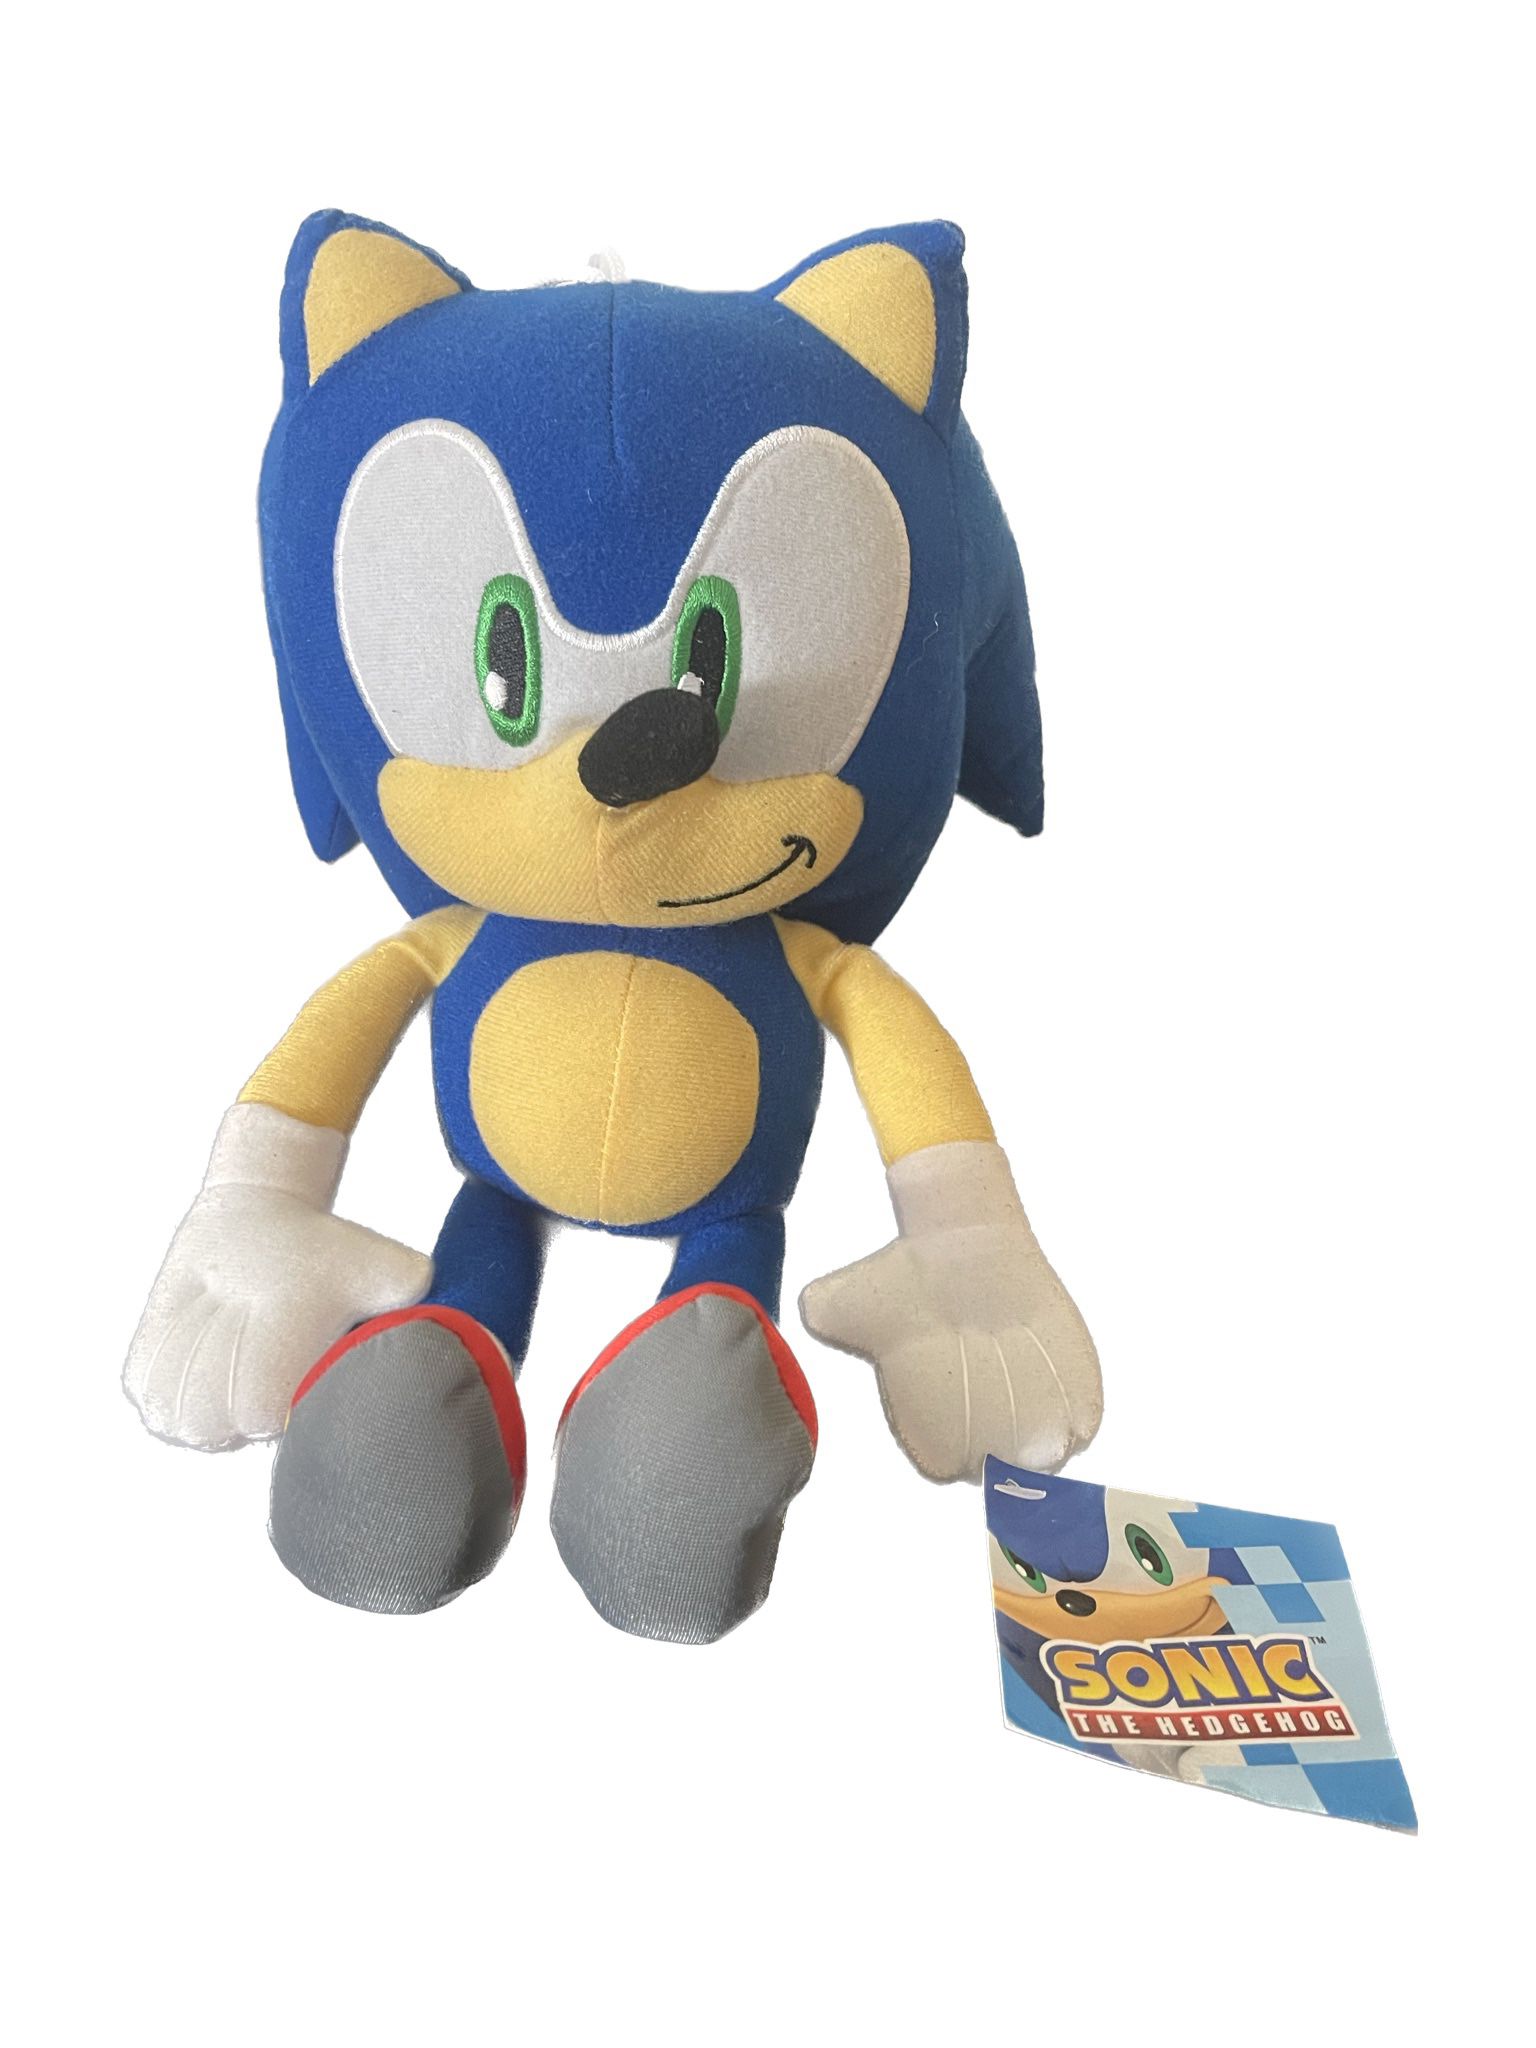 Sonic The Hedgehog 12” 2017 Plushie with tag